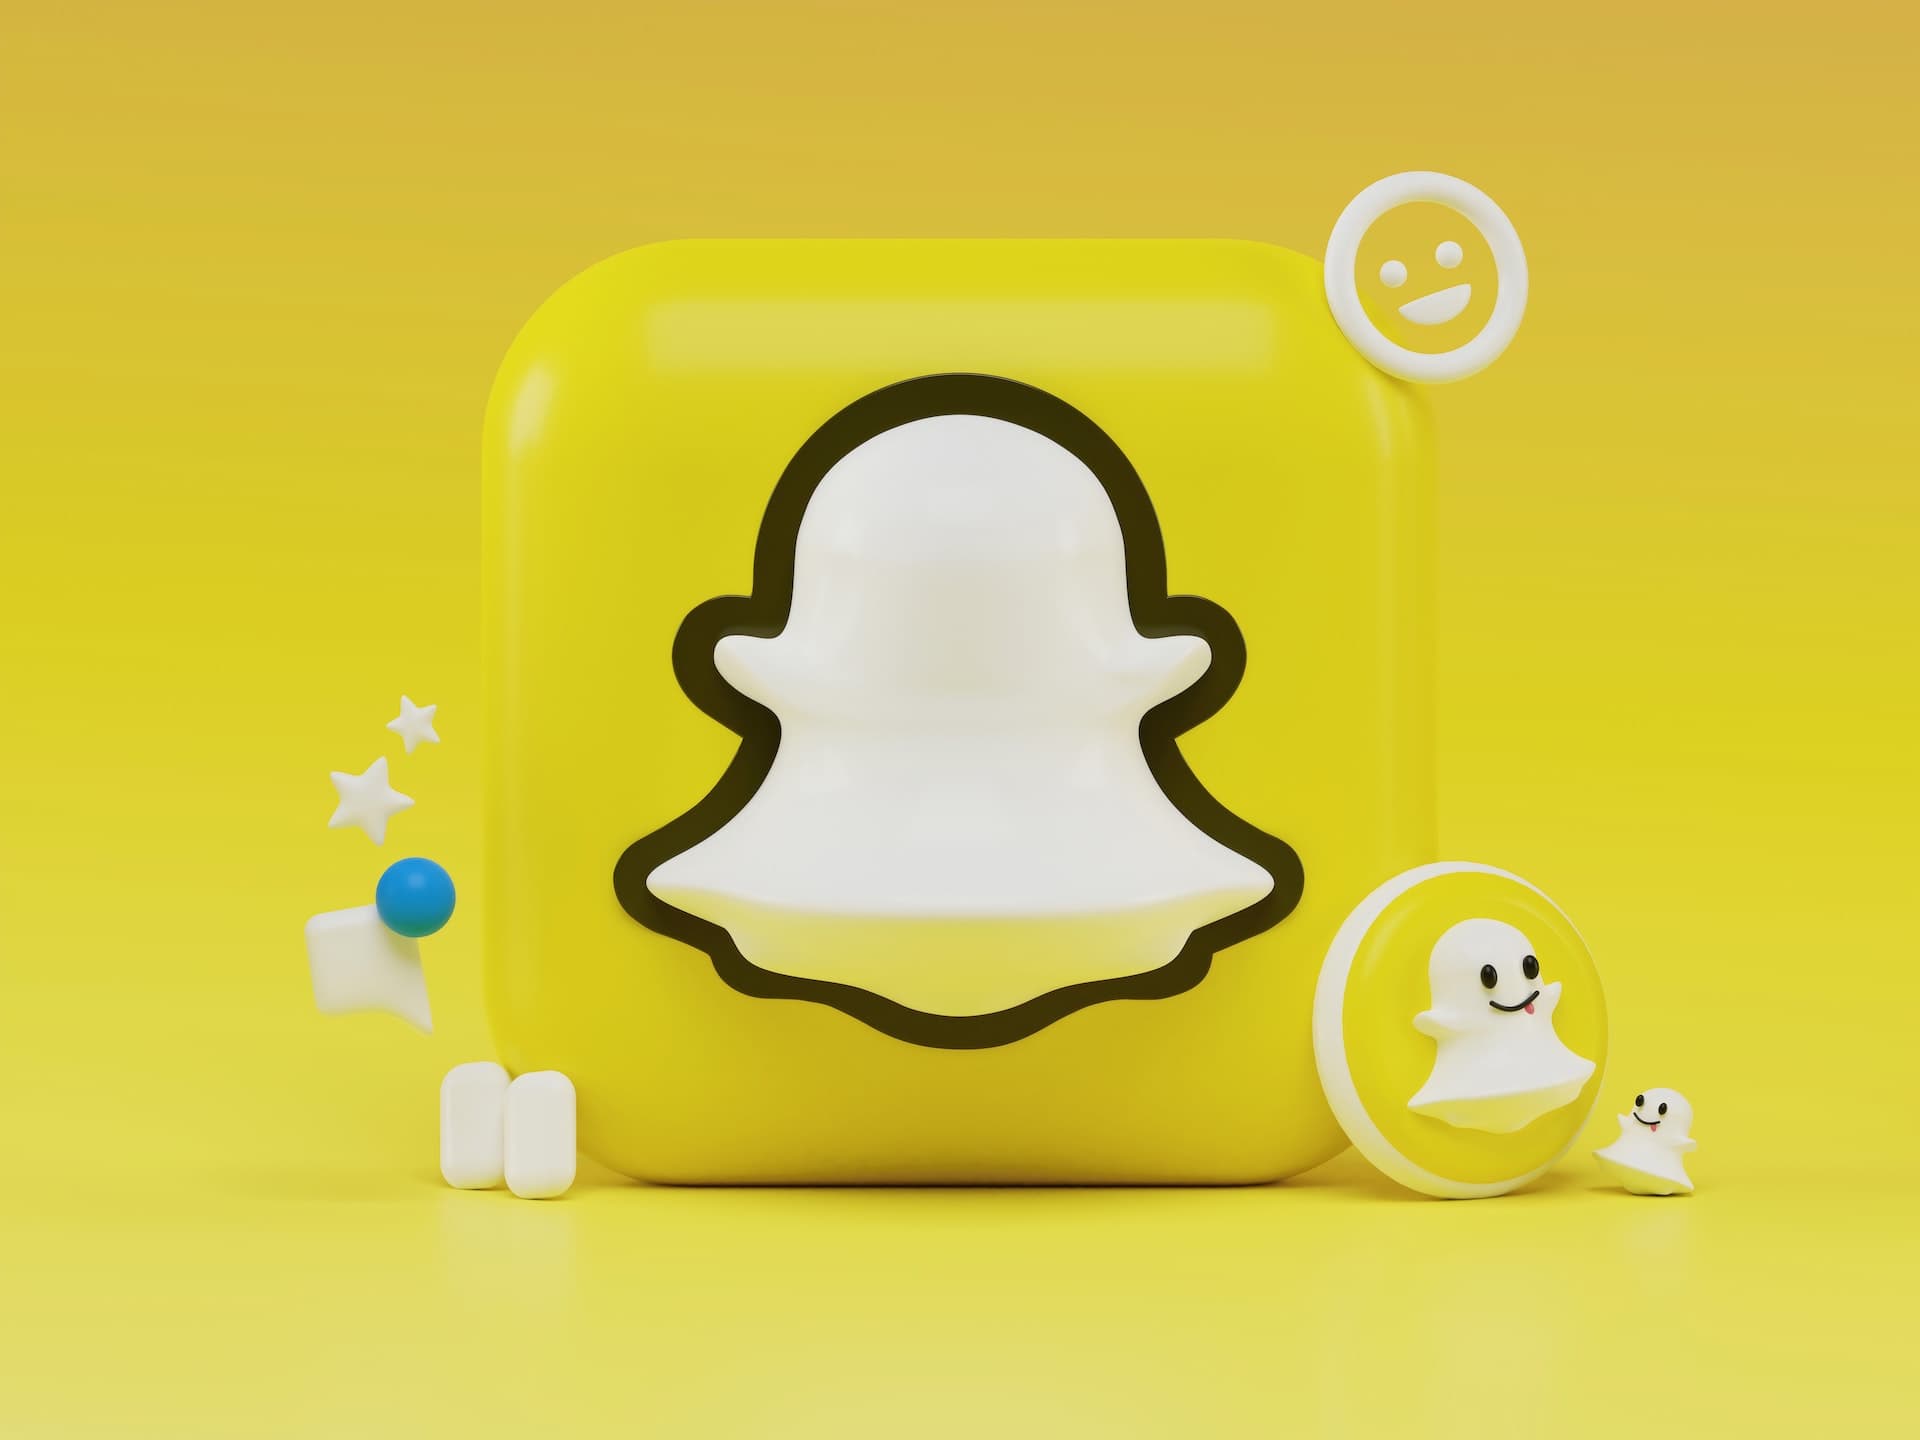 Lessons from Snap’s AR Lead